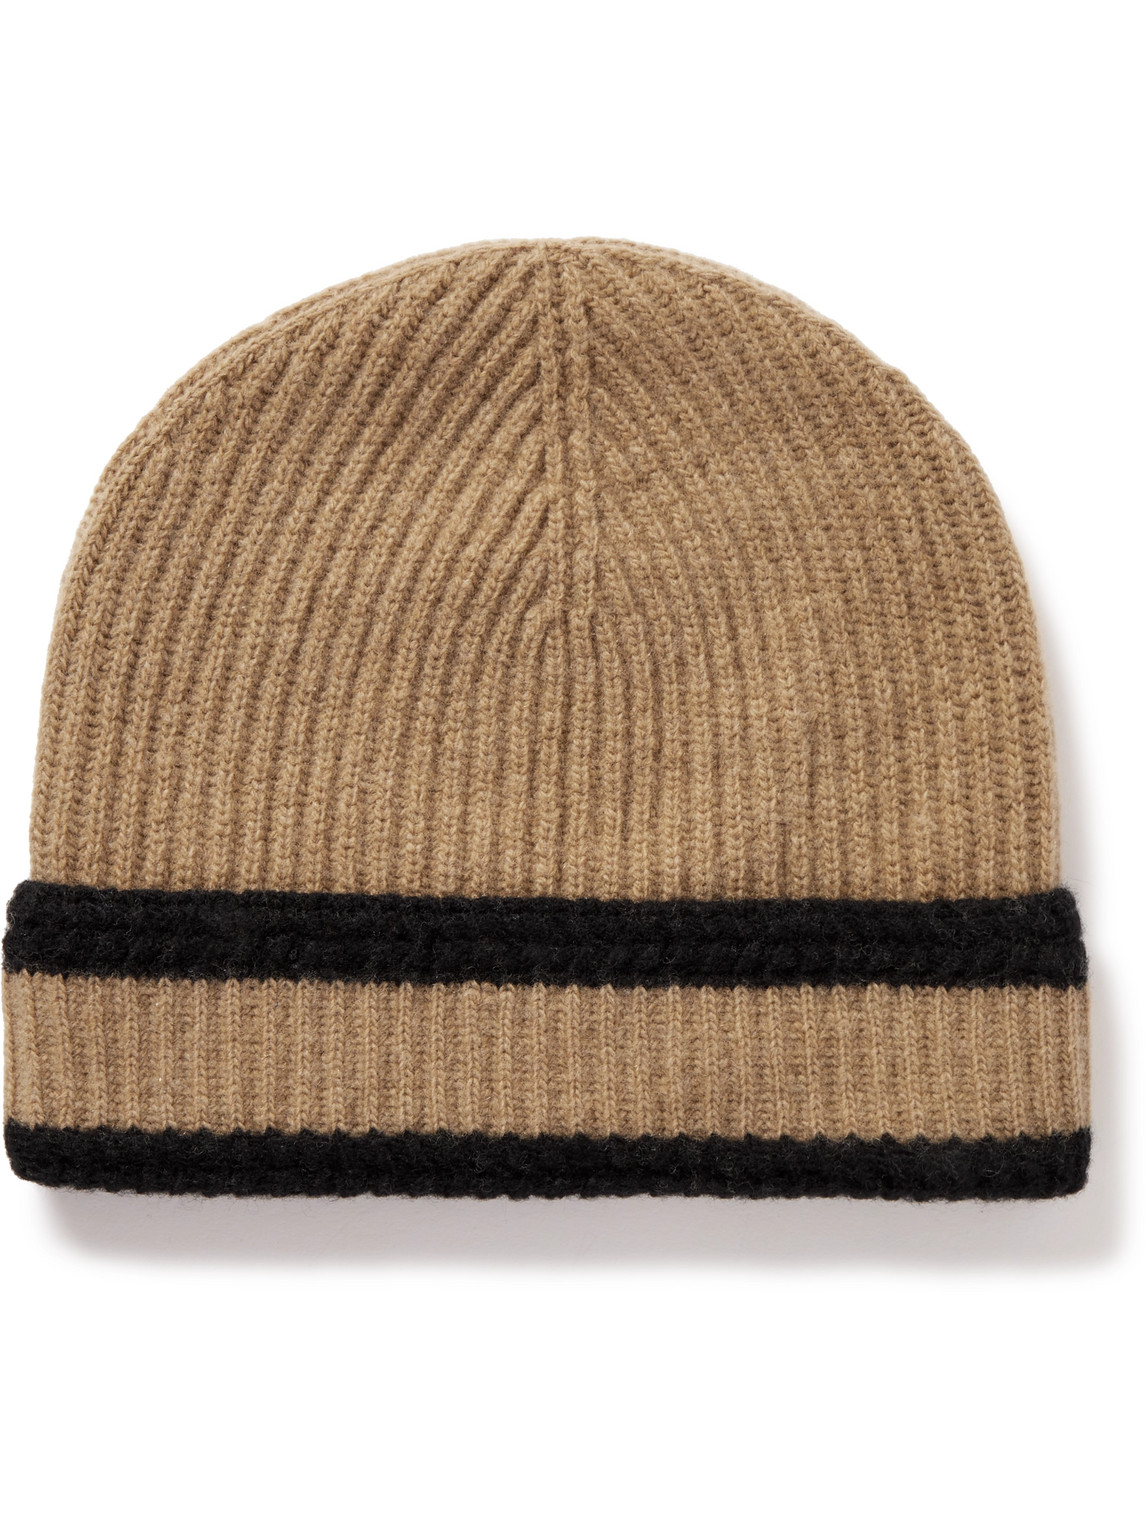 JOHNSTONS OF ELGIN STRIPPED RIBBED WOOL AND RECYCLED CASHMERE-BLEND BEANIE